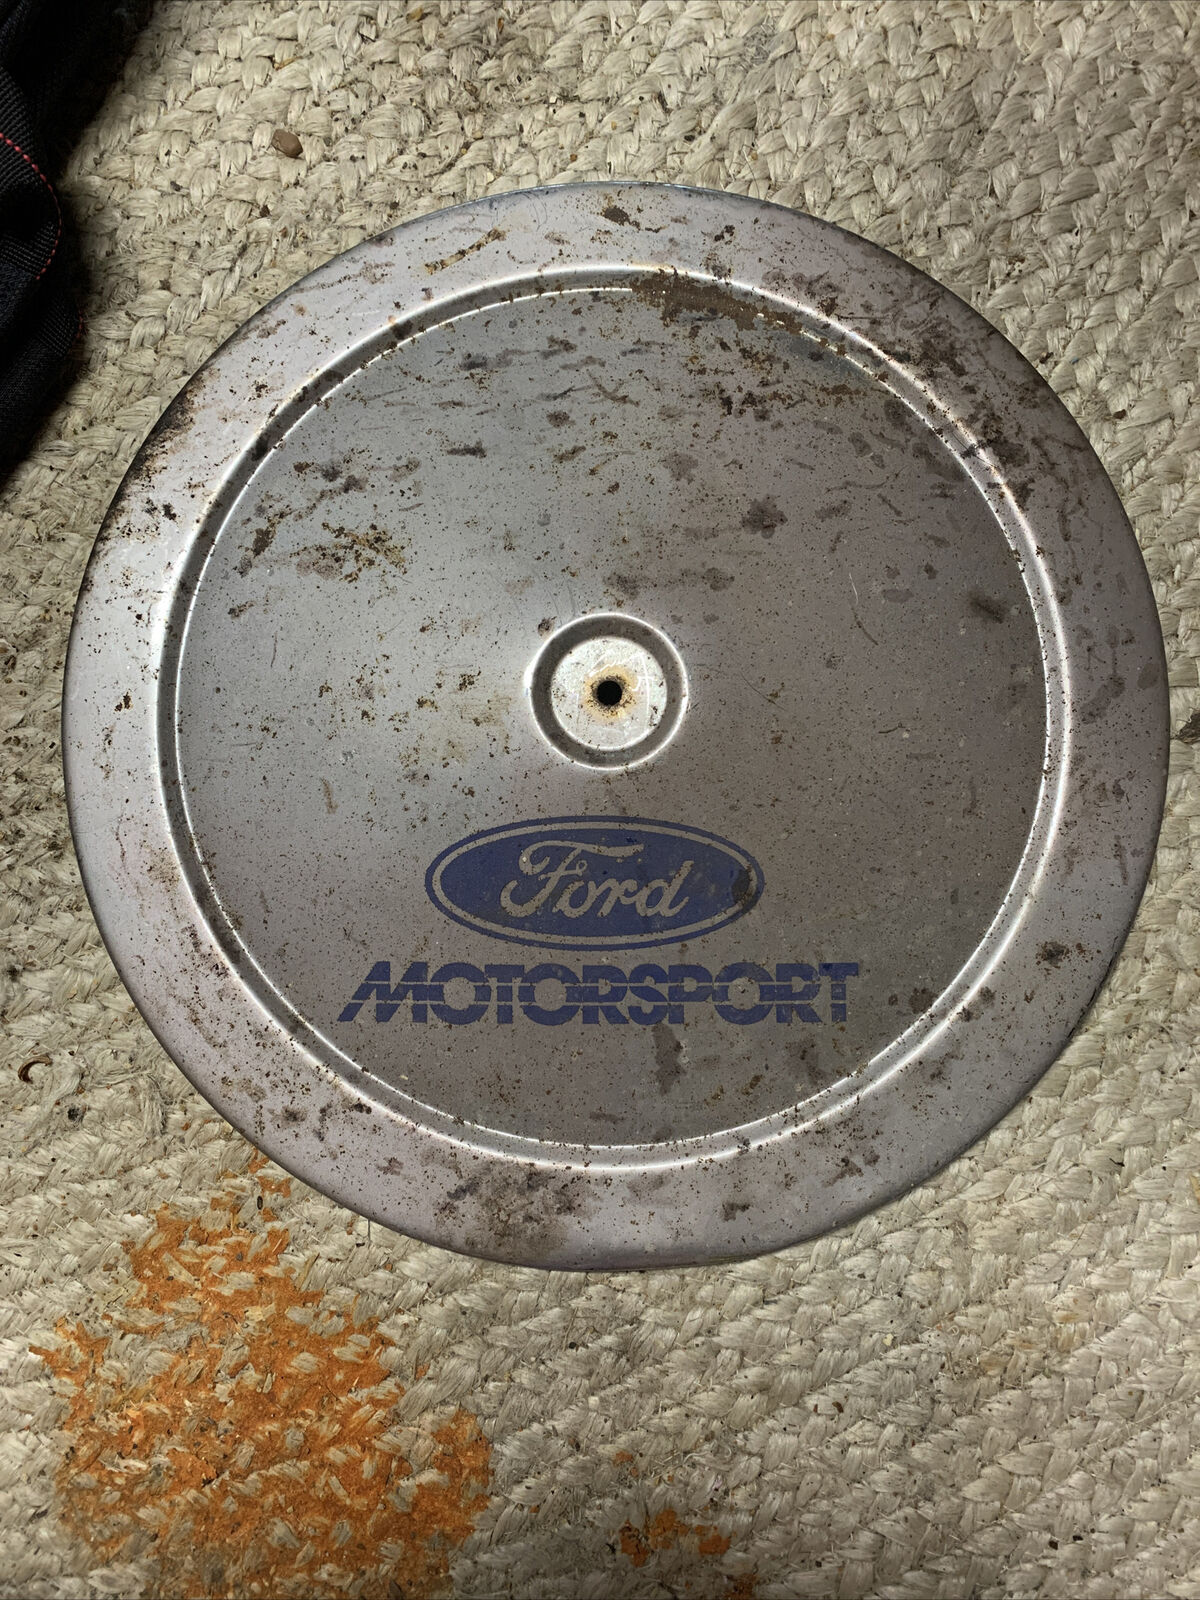 Rusted Ford Motorsport Vintage Filter Cover in need of love from the right one